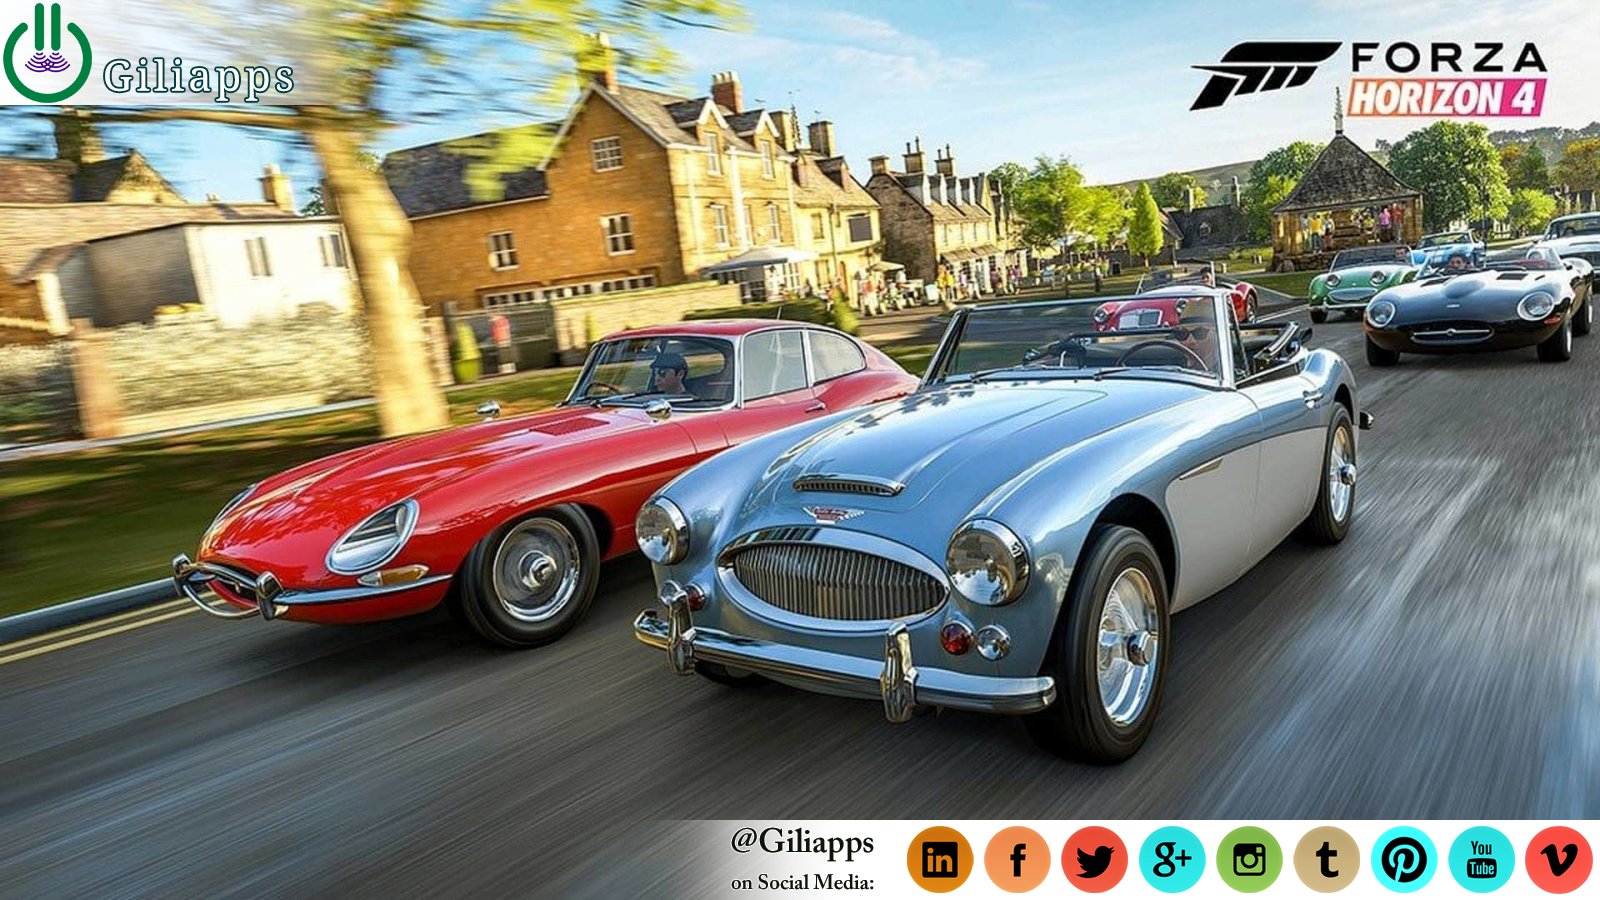 Forza Horizon 4 will release on 02 Oct 2018